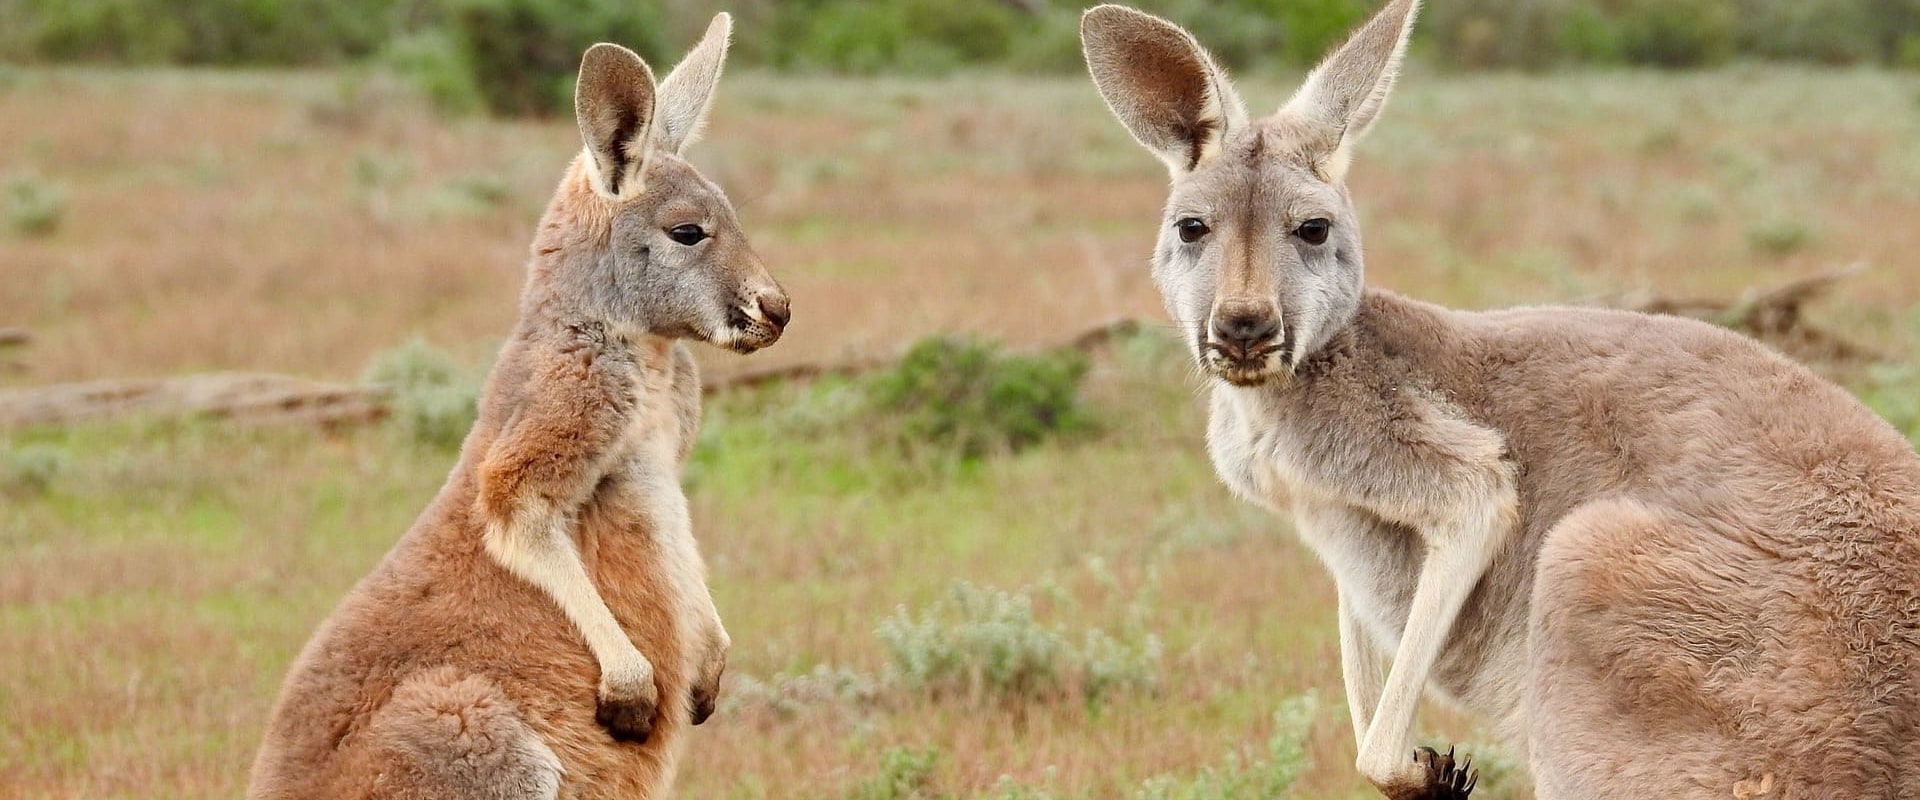 All You Need to Know about Kangaroos